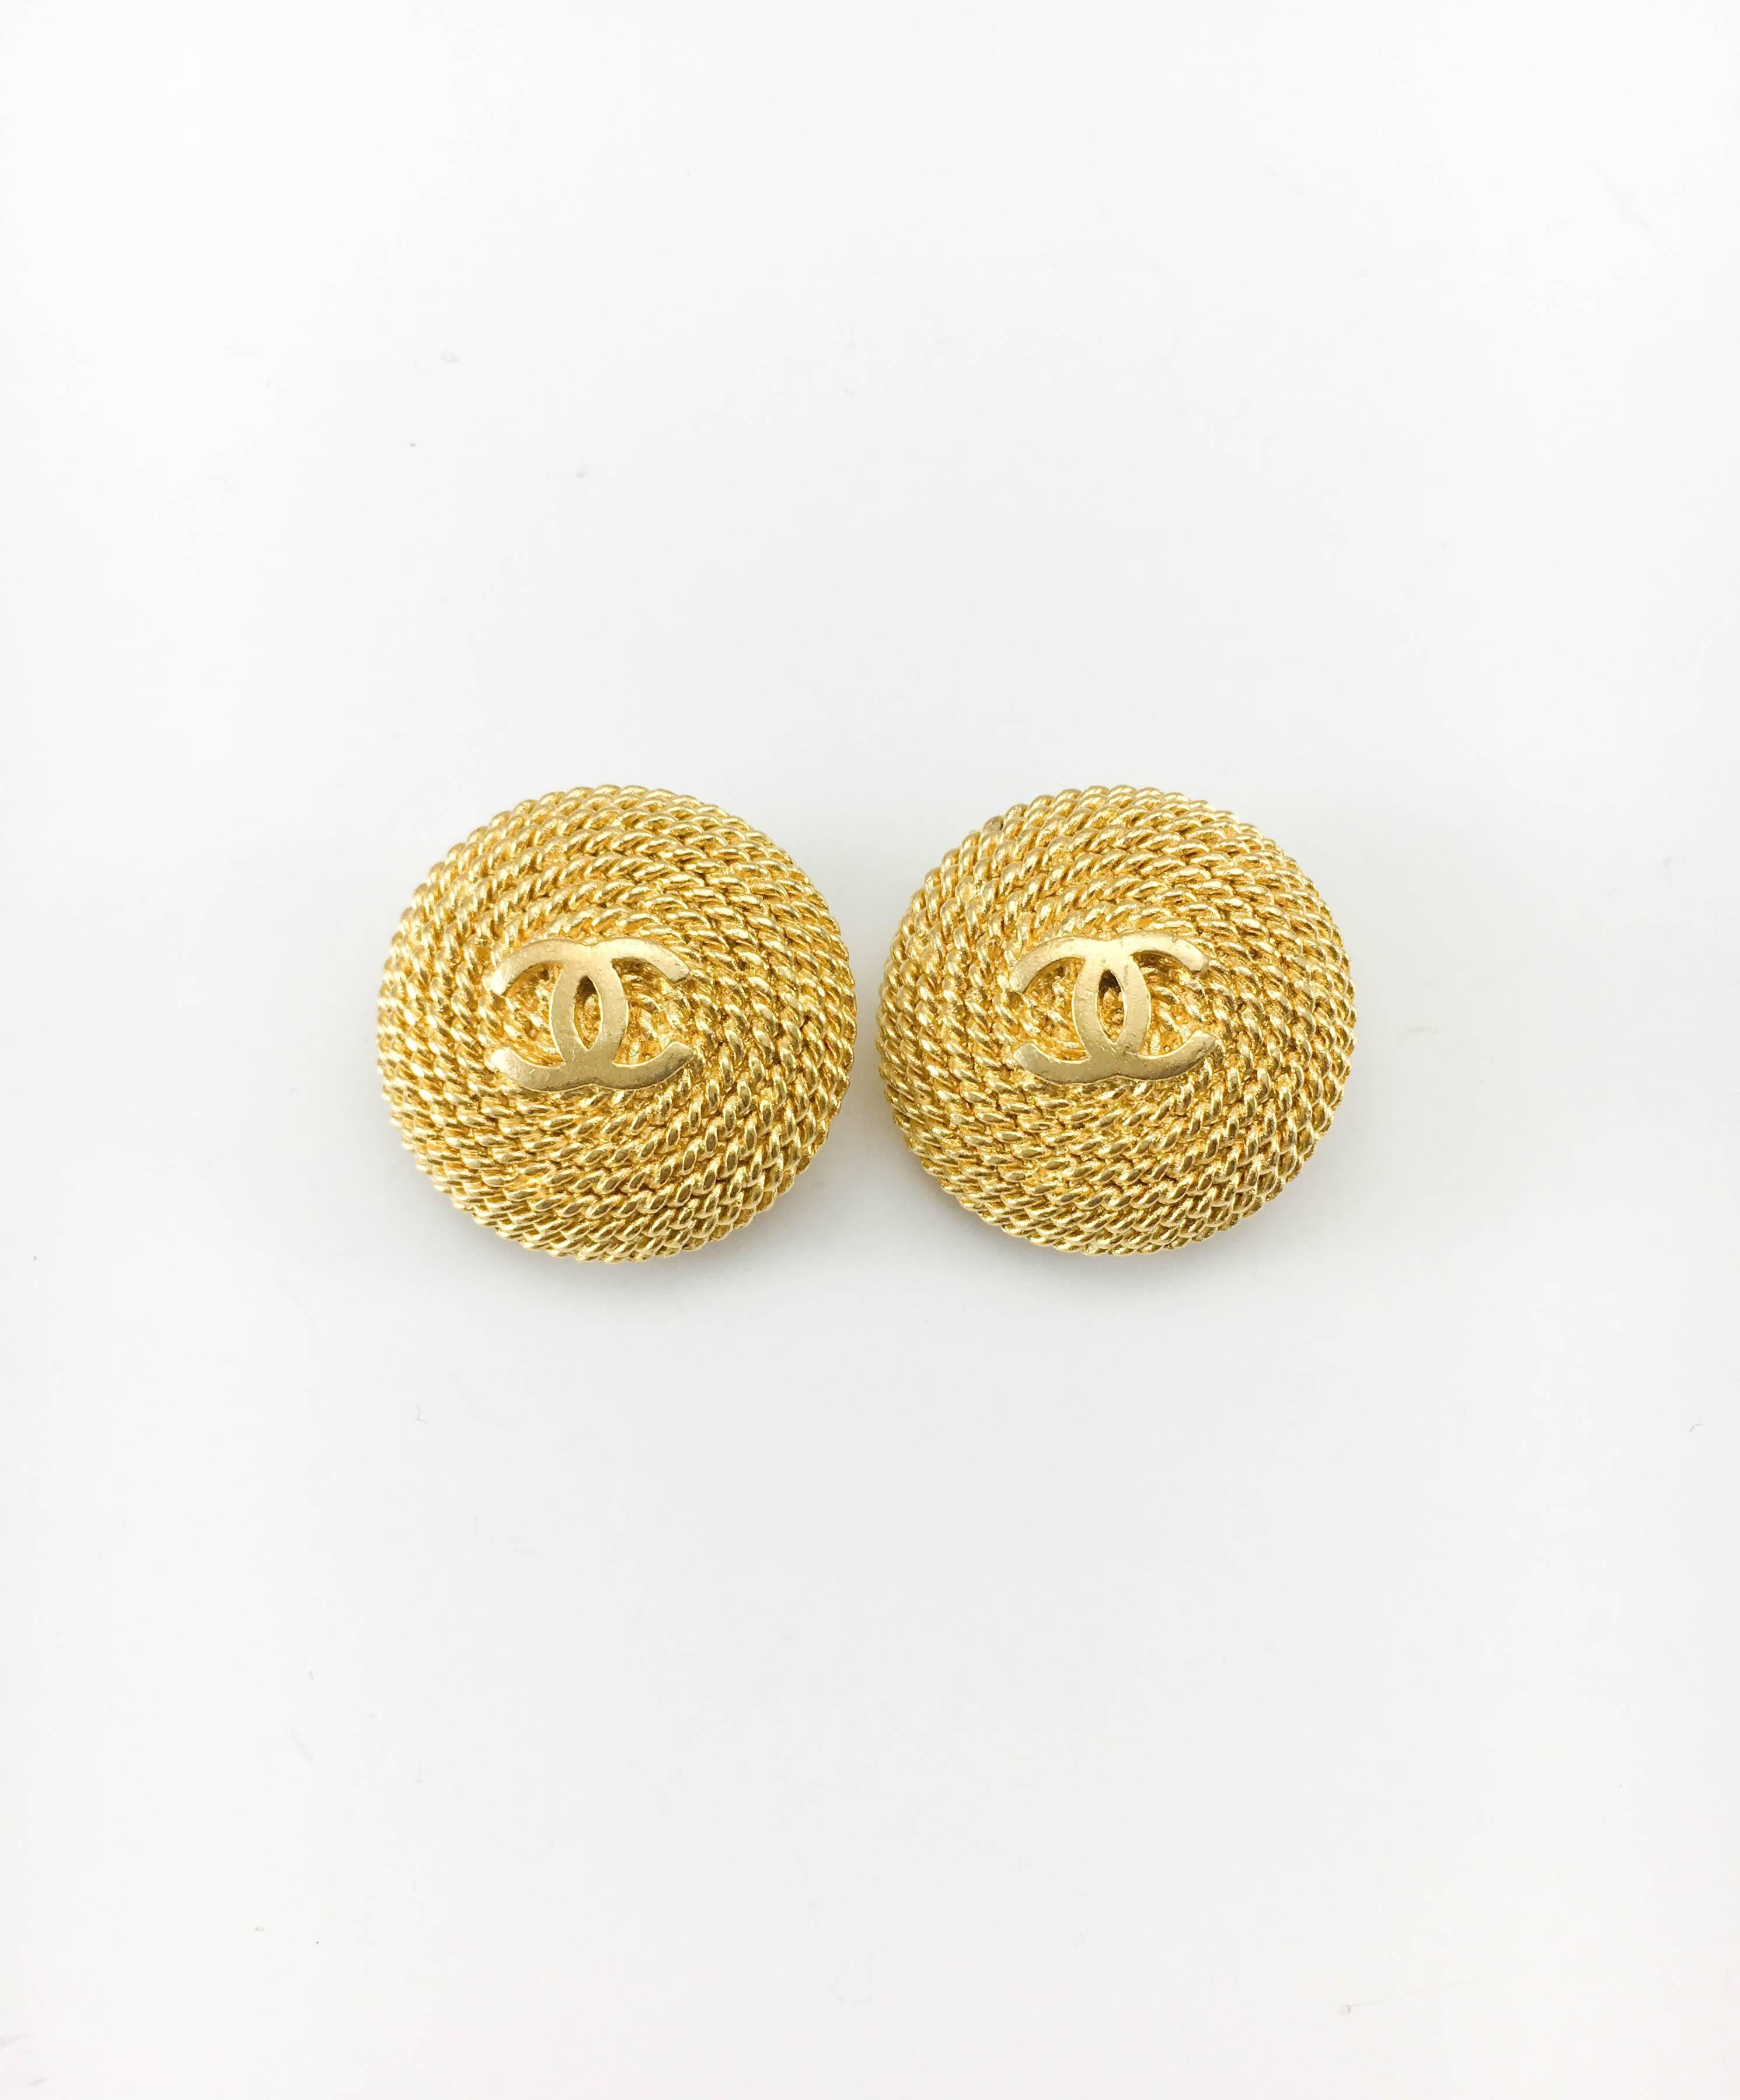 1995 Chanel Gold-Tone Twisted Rope Logo Earrings In Excellent Condition In London, Chelsea